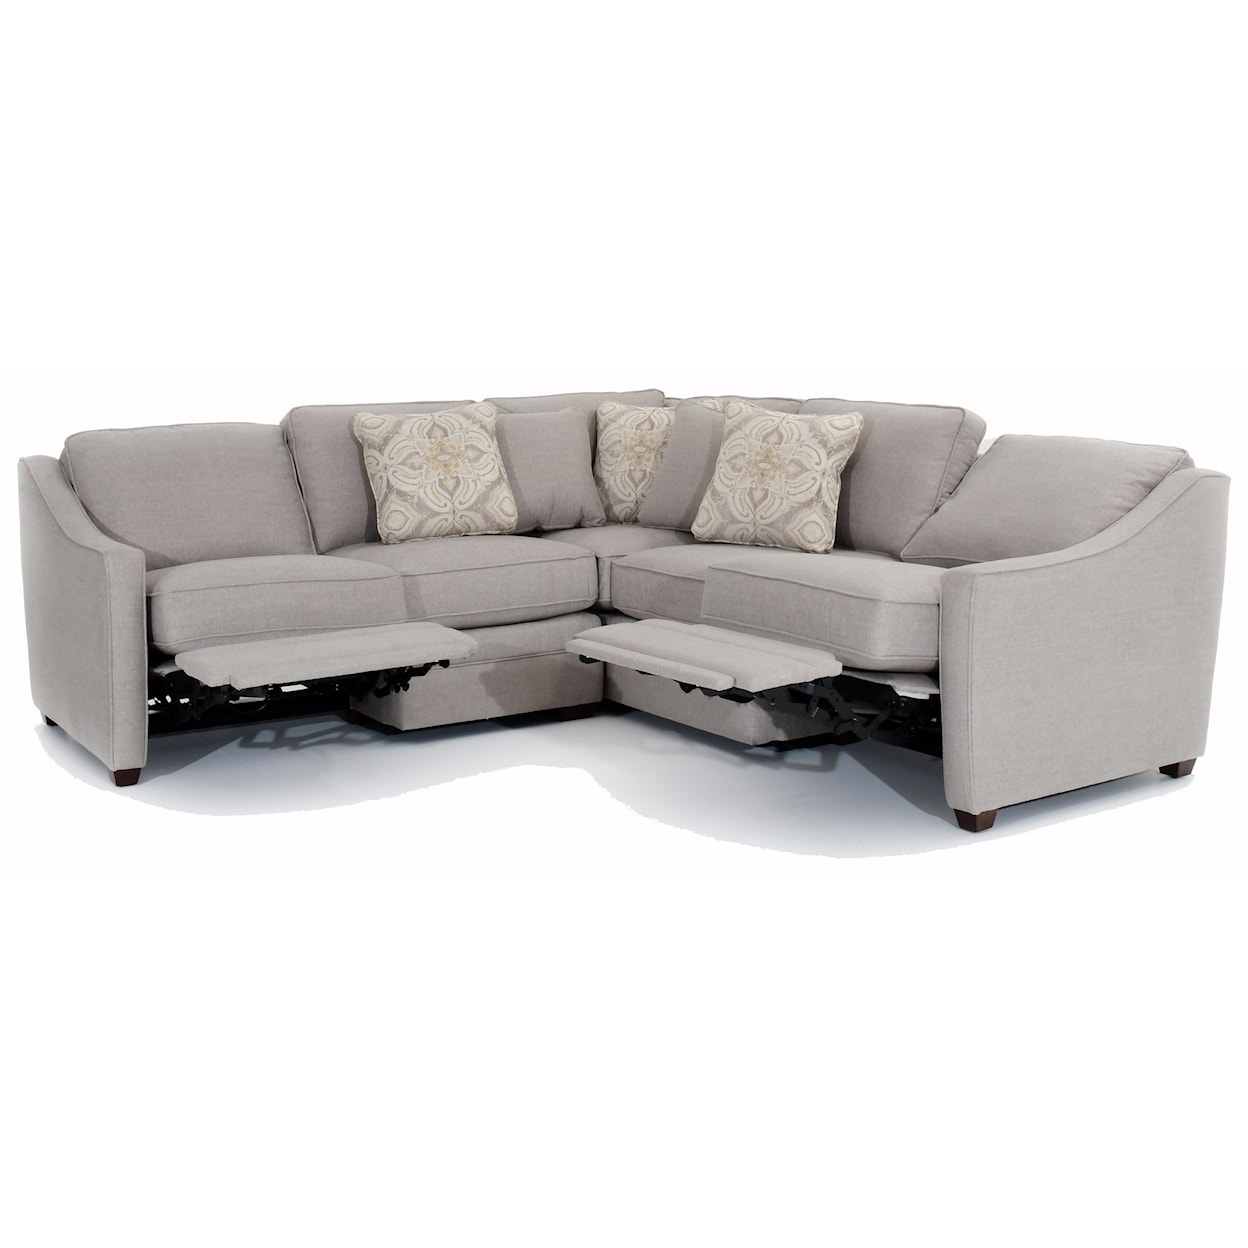 Craftmaster F9 Design Options Custom 2 Pc Sectional w/ Recliners